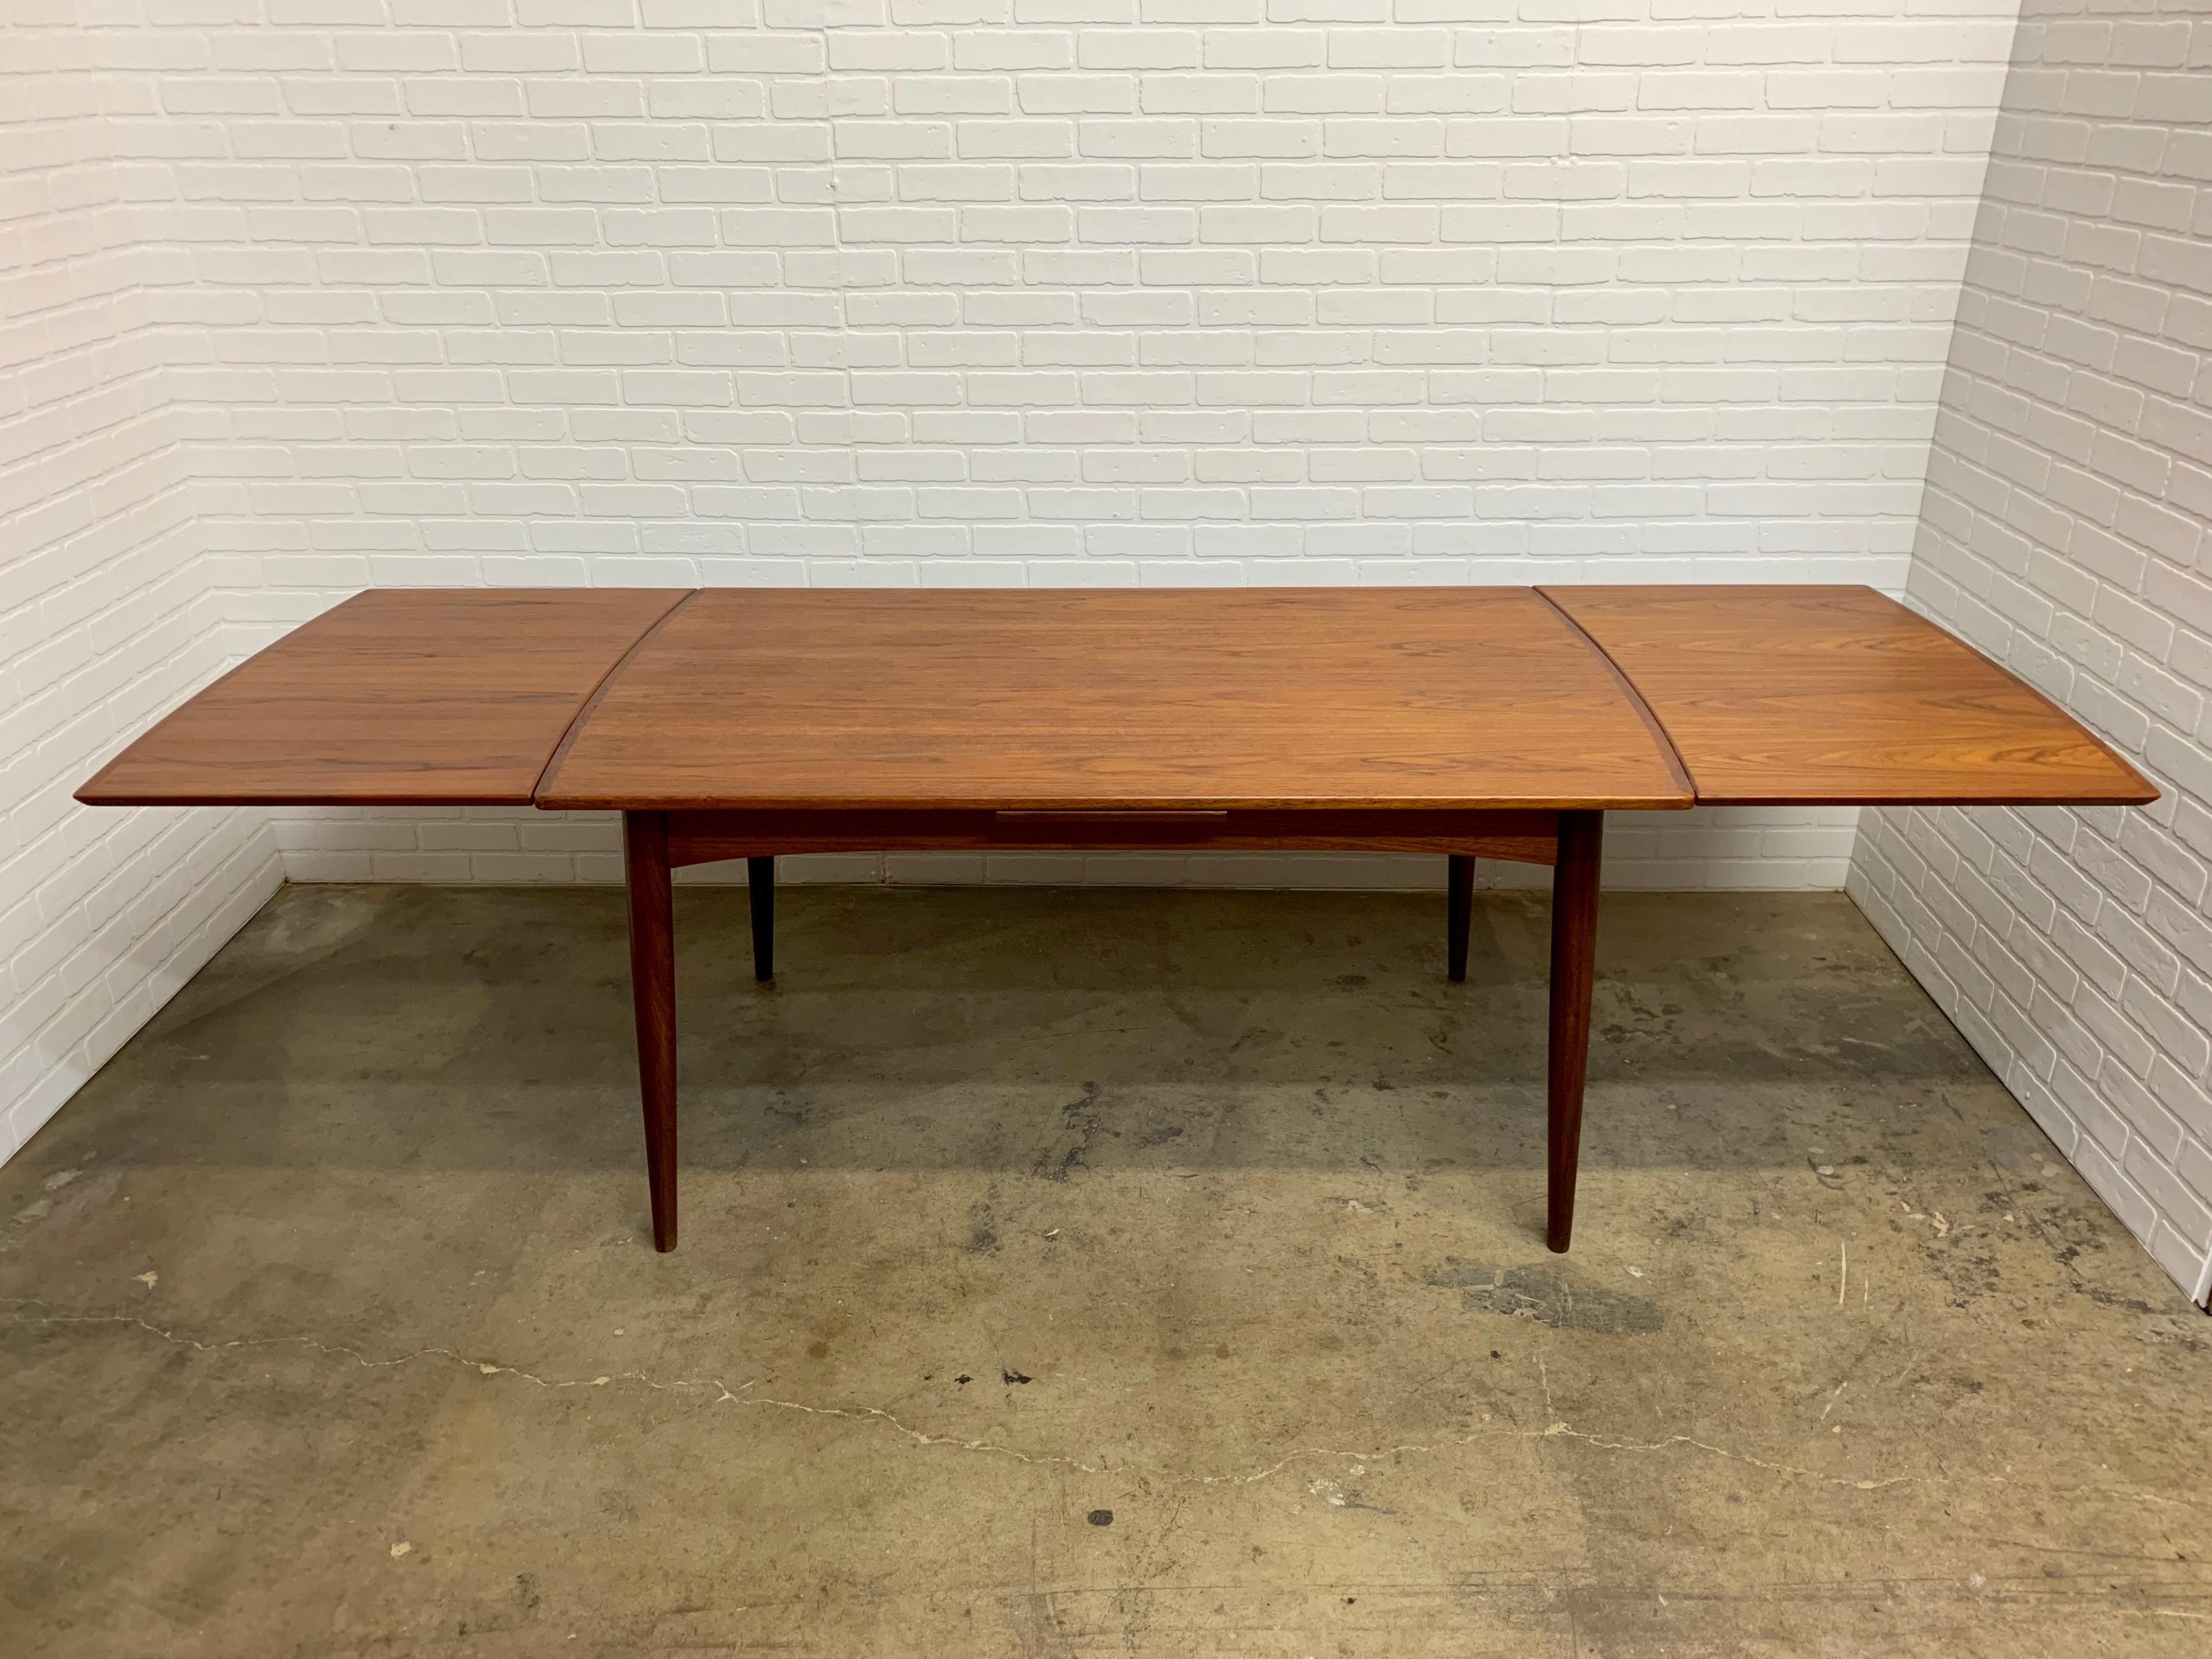 1960s Danish teak dining table with expandable leaves for a total length of 101.5